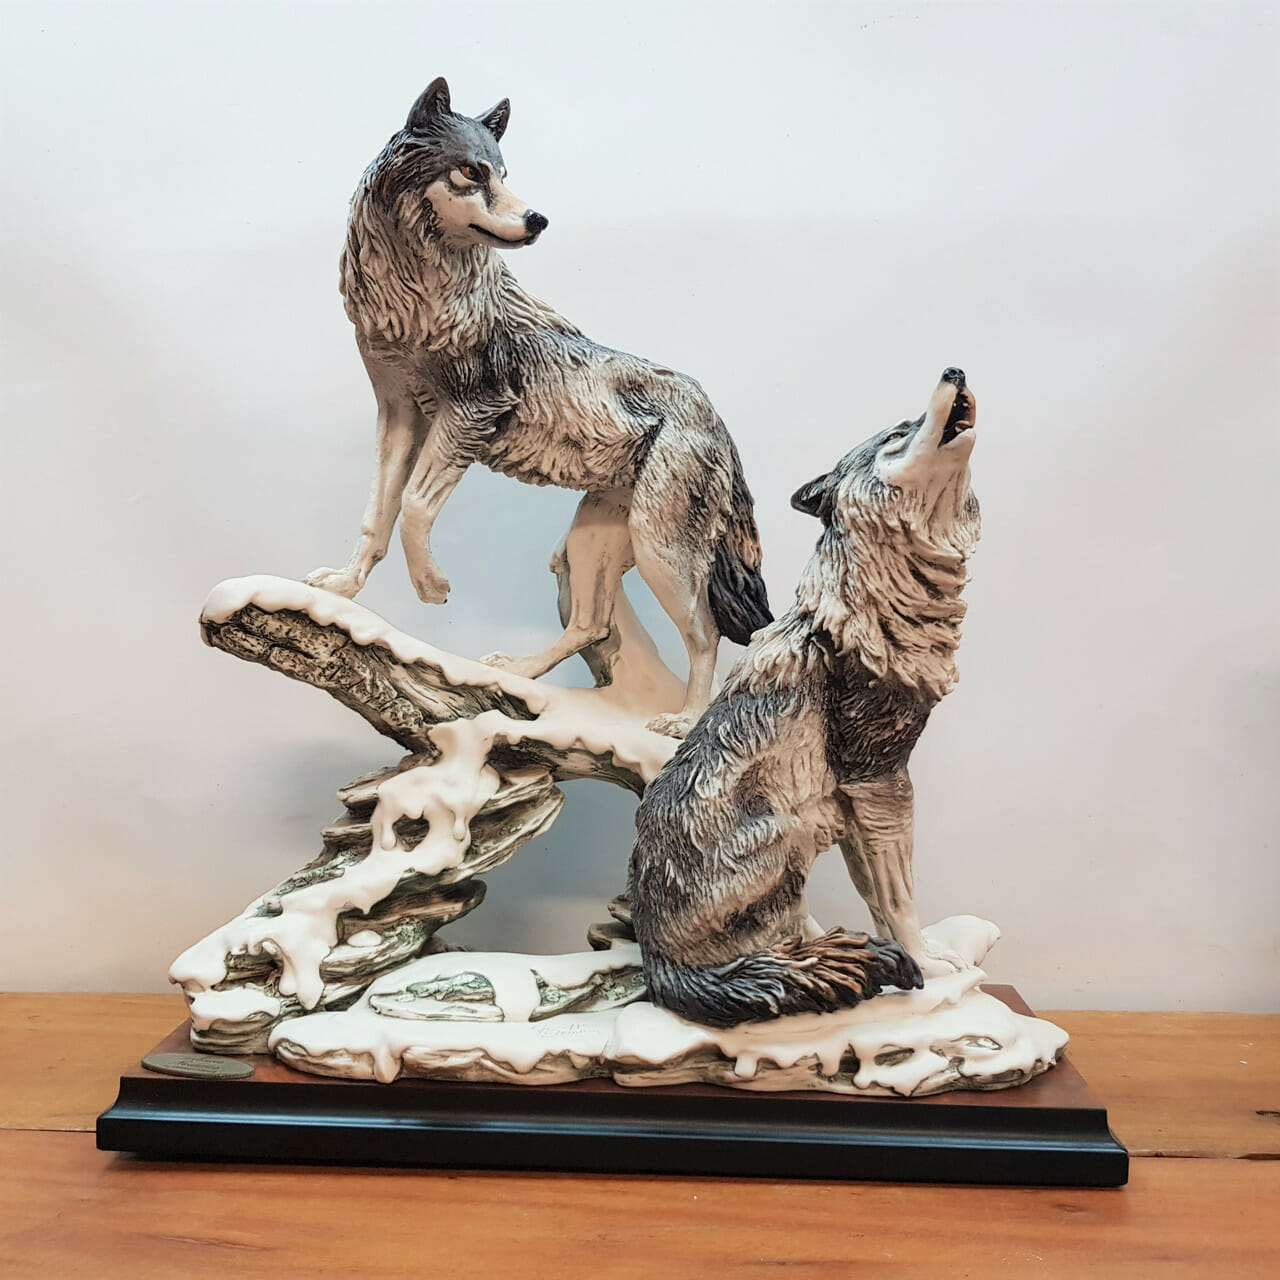 GIUSEPPE ARMANI NOCTURNE WOLVES SCULPTURE - LIMITED EDITION 365/1500 #41679